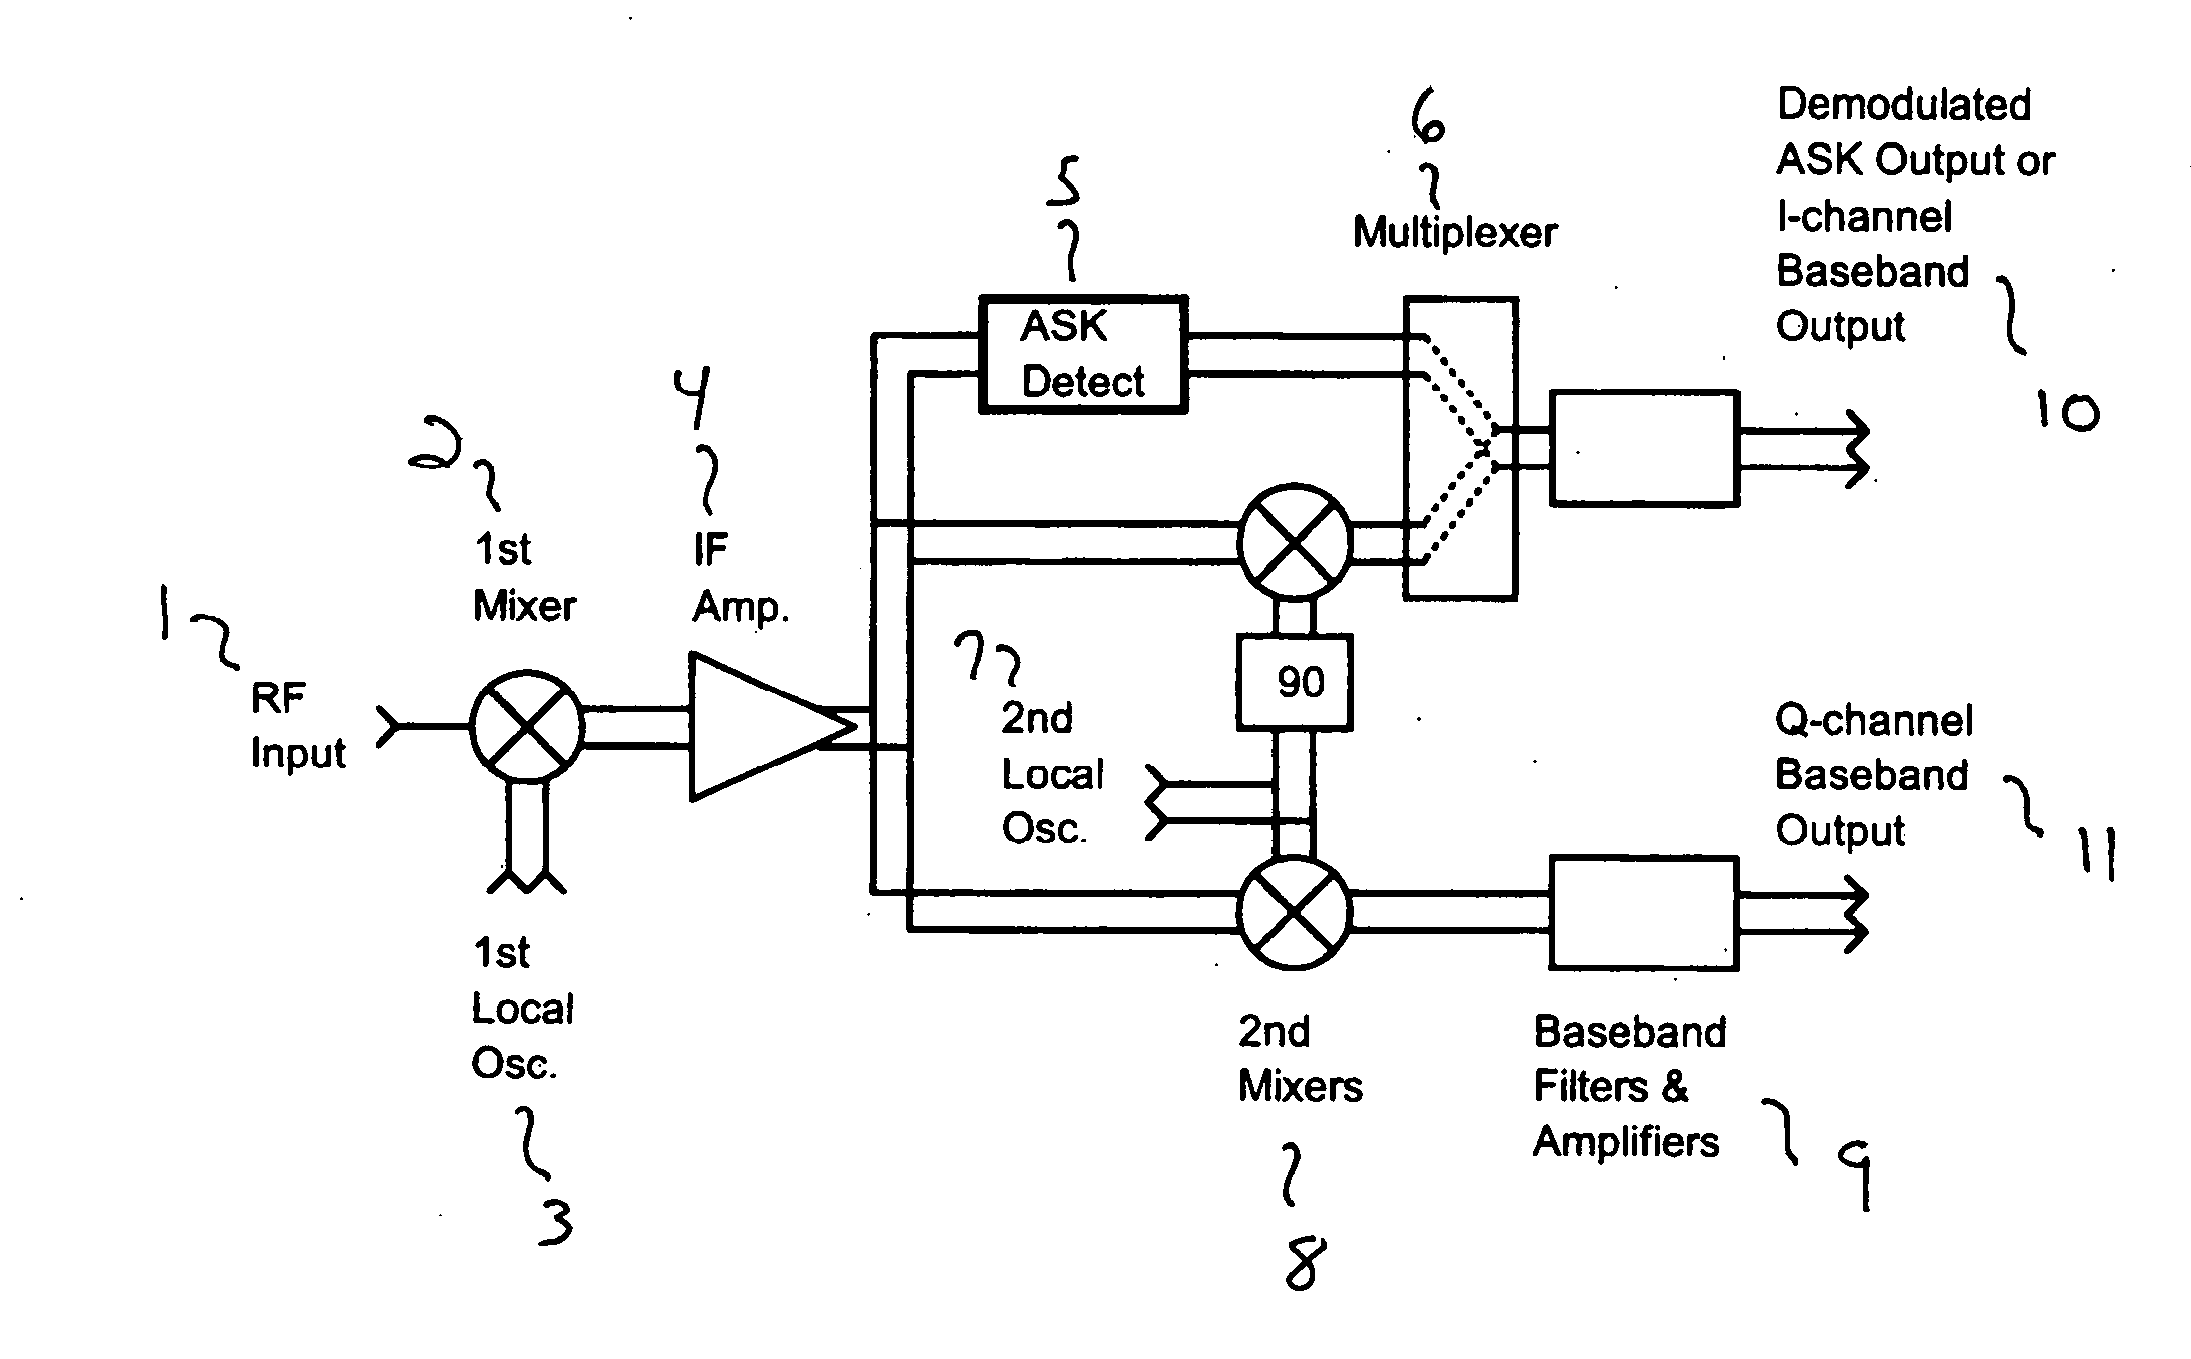 Receiver and integrated am-fm/iq demodulators for gigabit-rate data detection